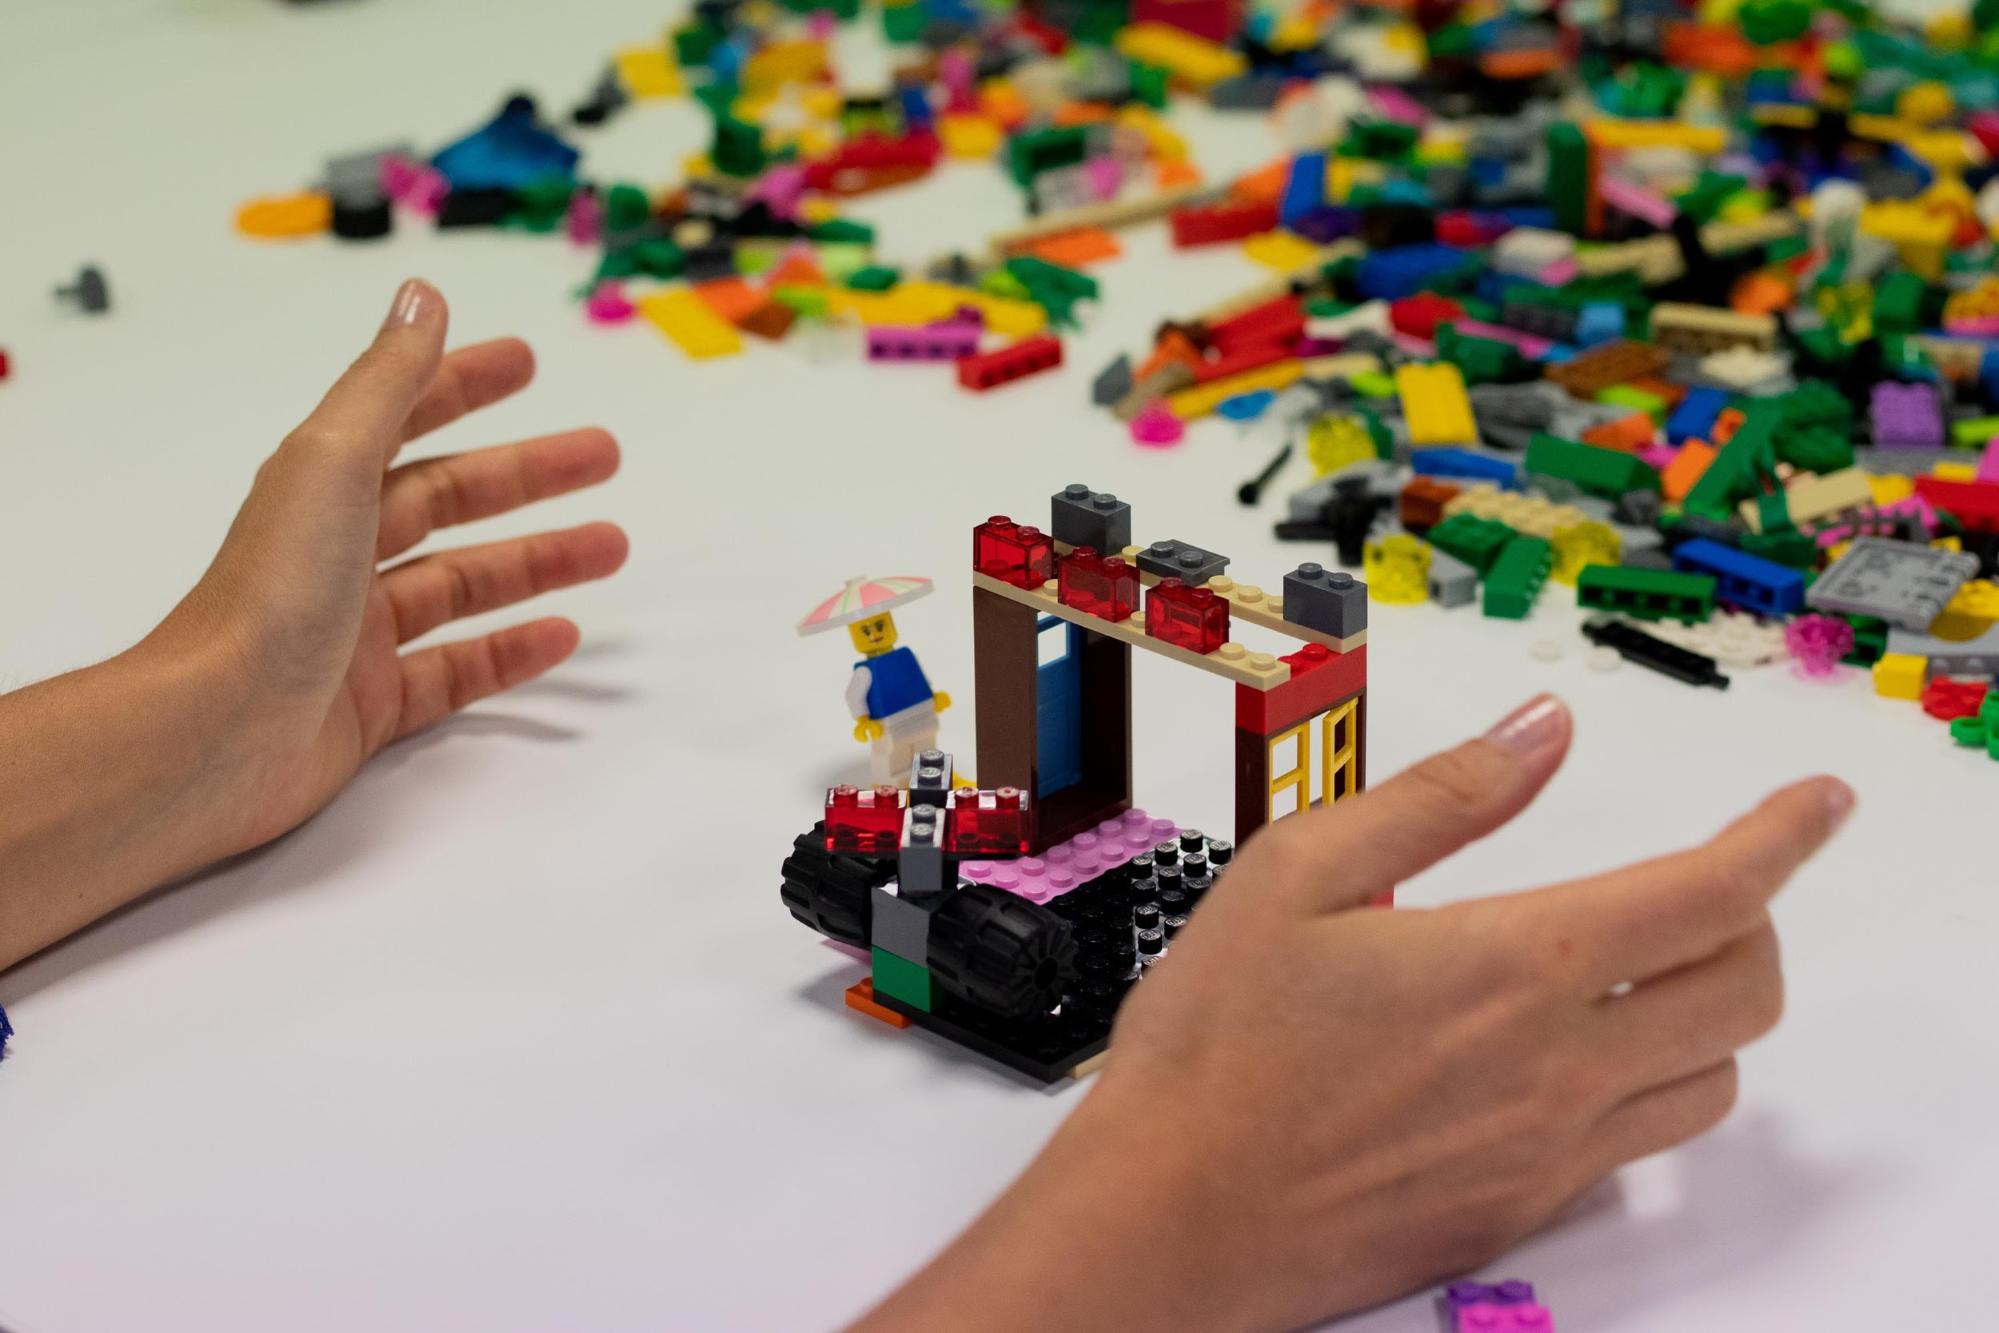 Refinement underviser Merchandiser Workshop 5: Generate Ideas with LEGO® SERIOUS PLAY® - ADCE Festival